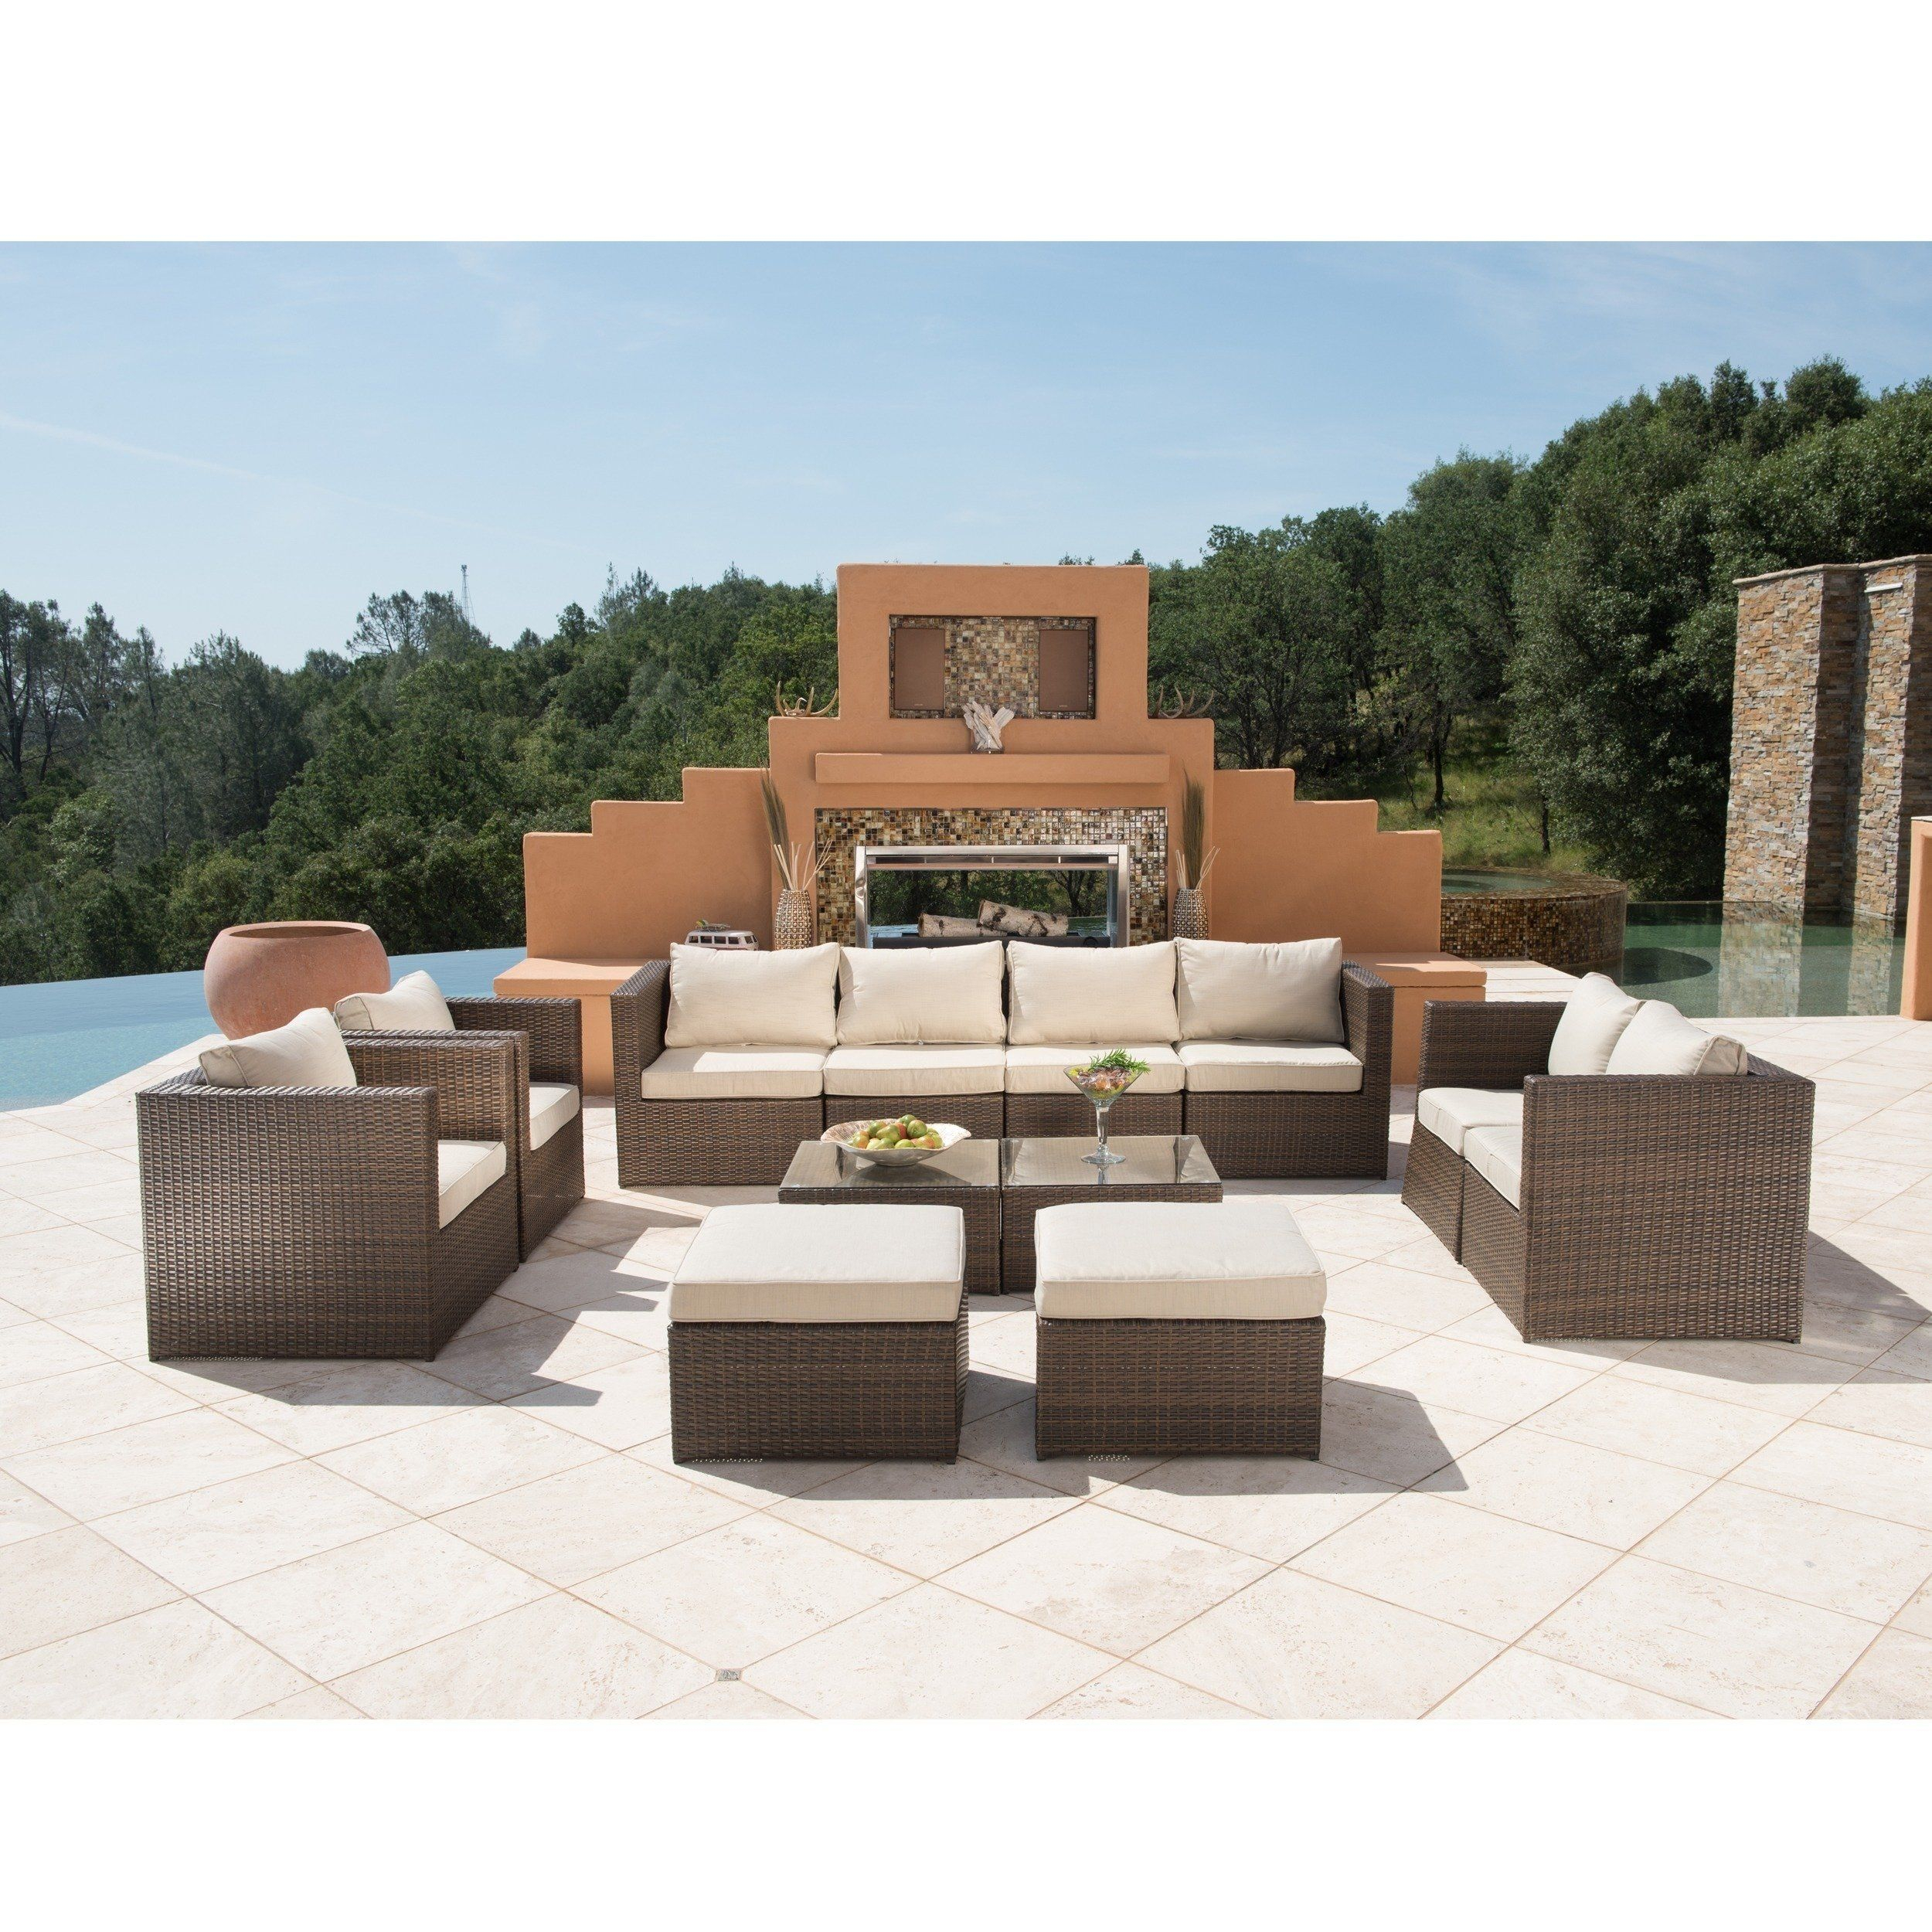 Best Outdoor Patio Furniture Material Patio Ideas intended for sizing 2500 X 2500